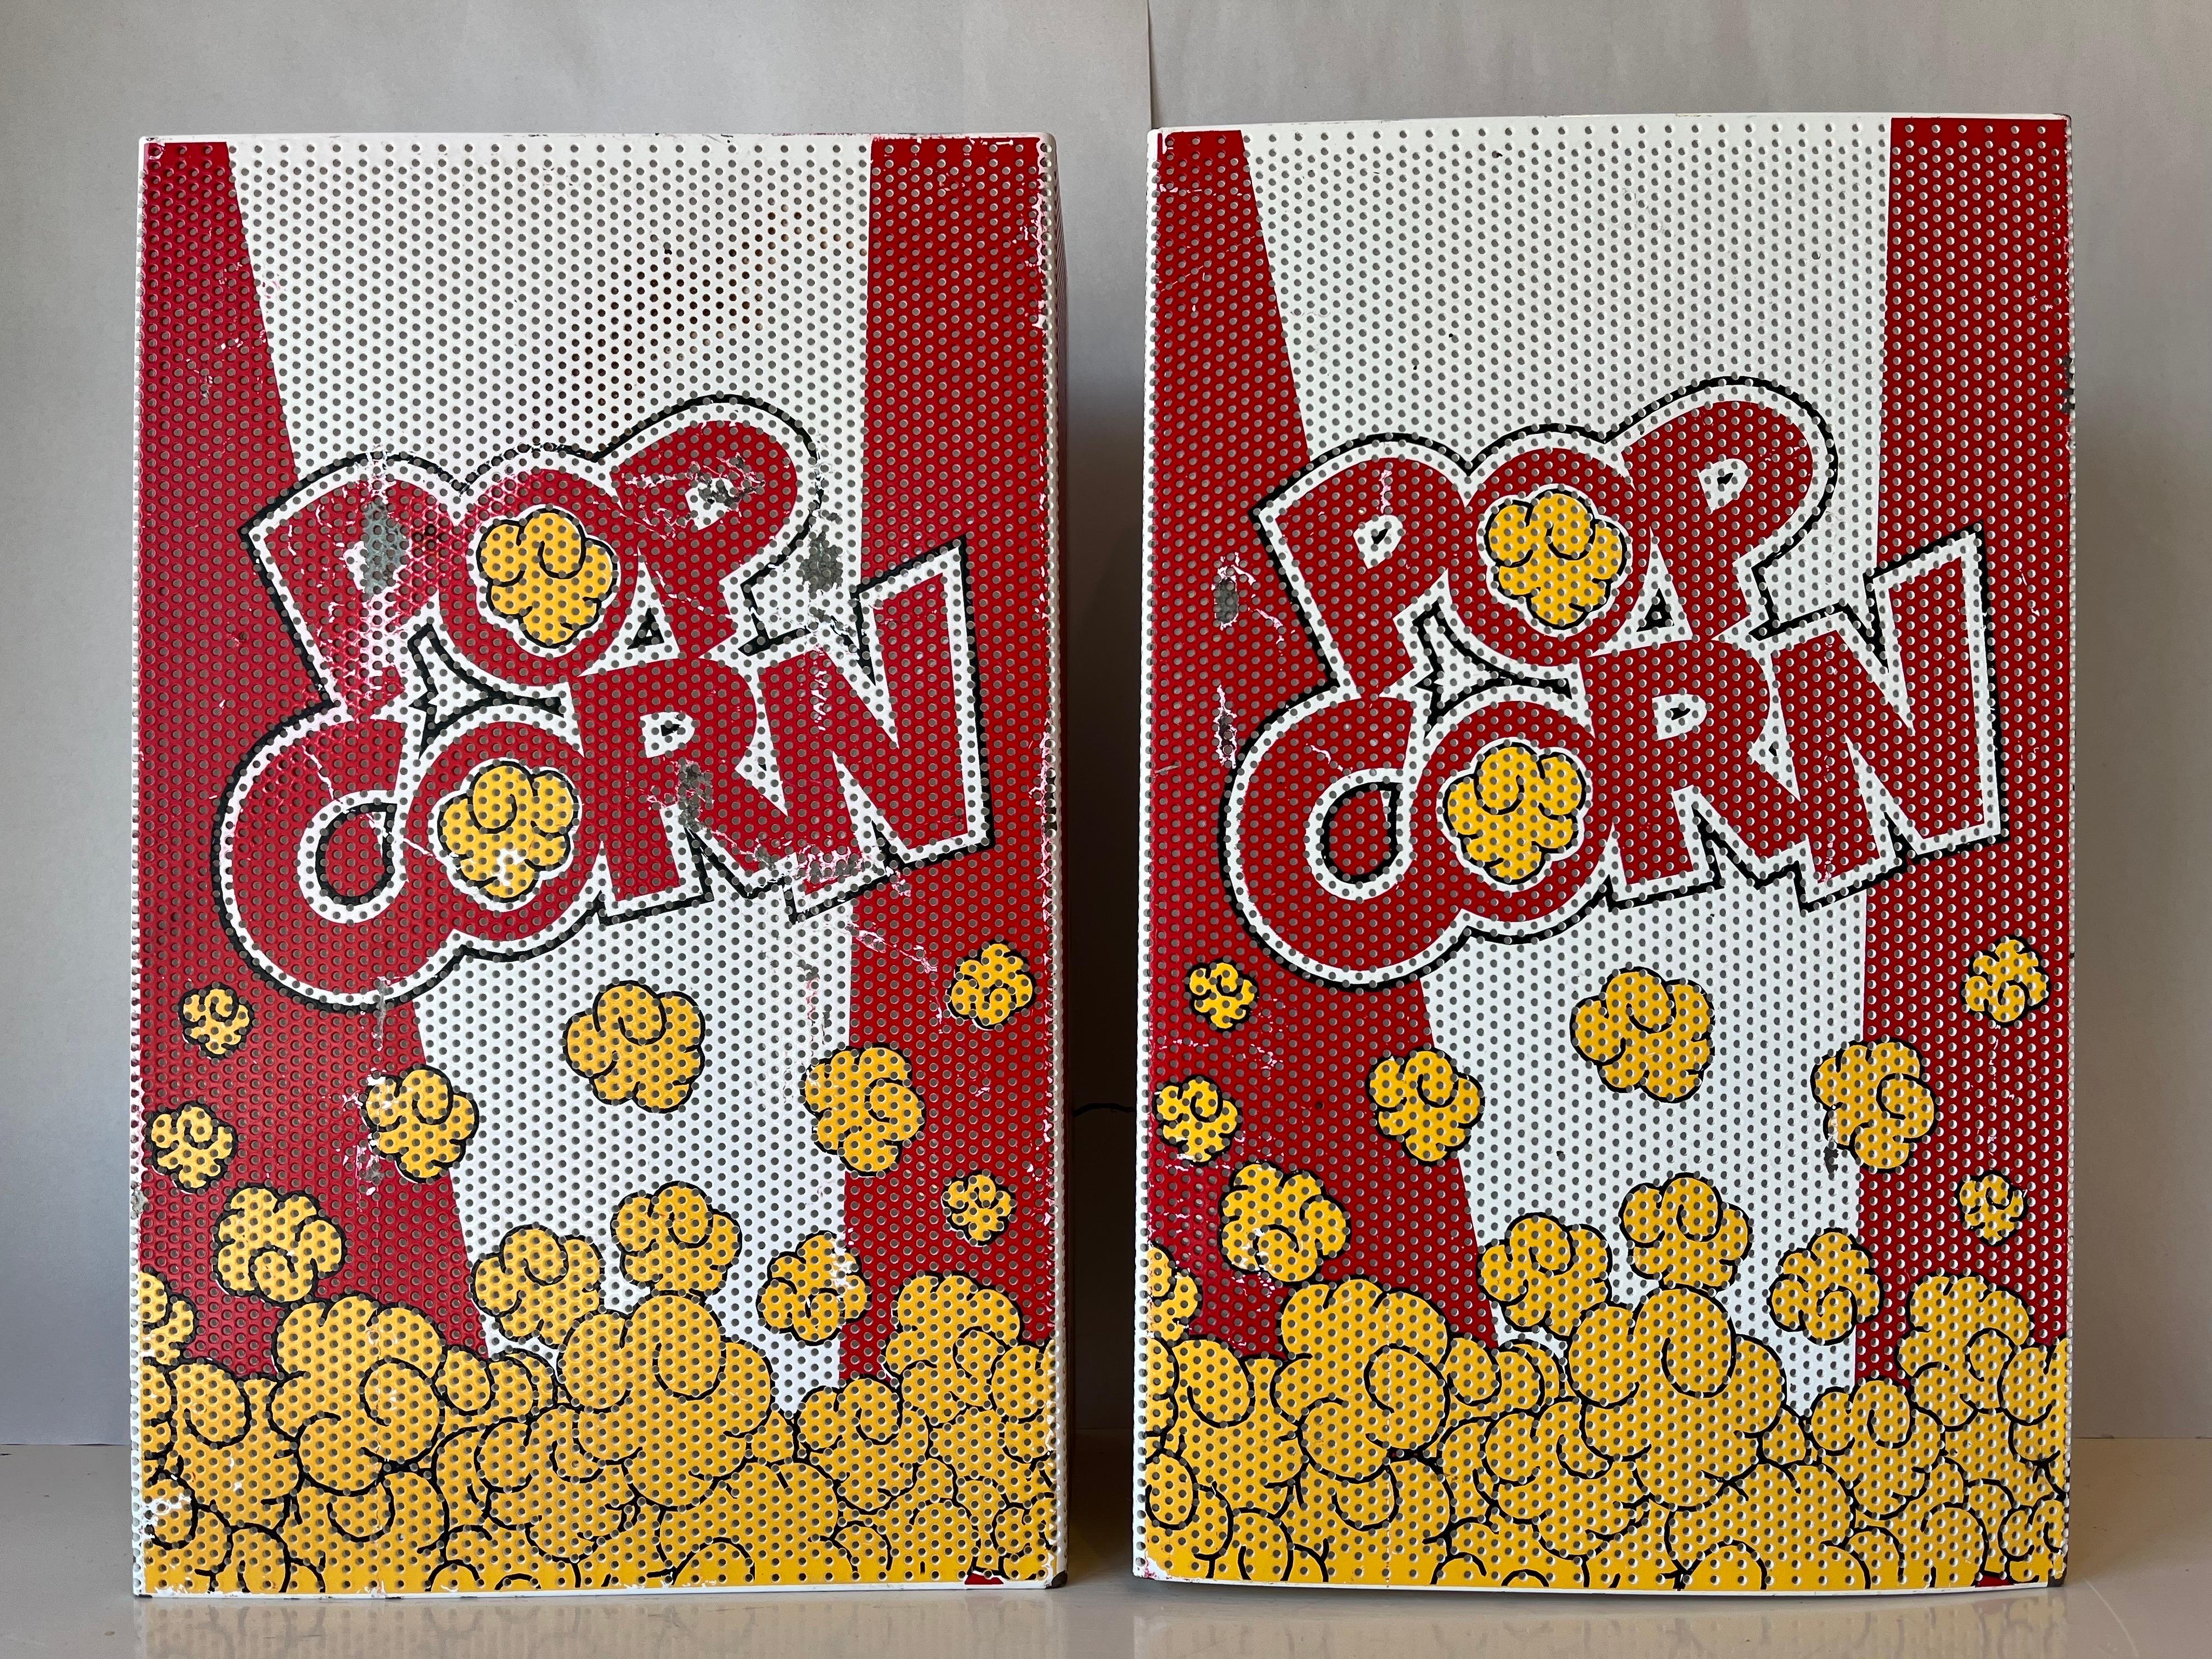 Do some folks have you reaching for the popcorn? Maybe you're doing a media room, bar or kids room? Perhaps you love popcorn... If any or all of the above are true, then I have the pair of wall sconces for you. Legend has it that these hail from